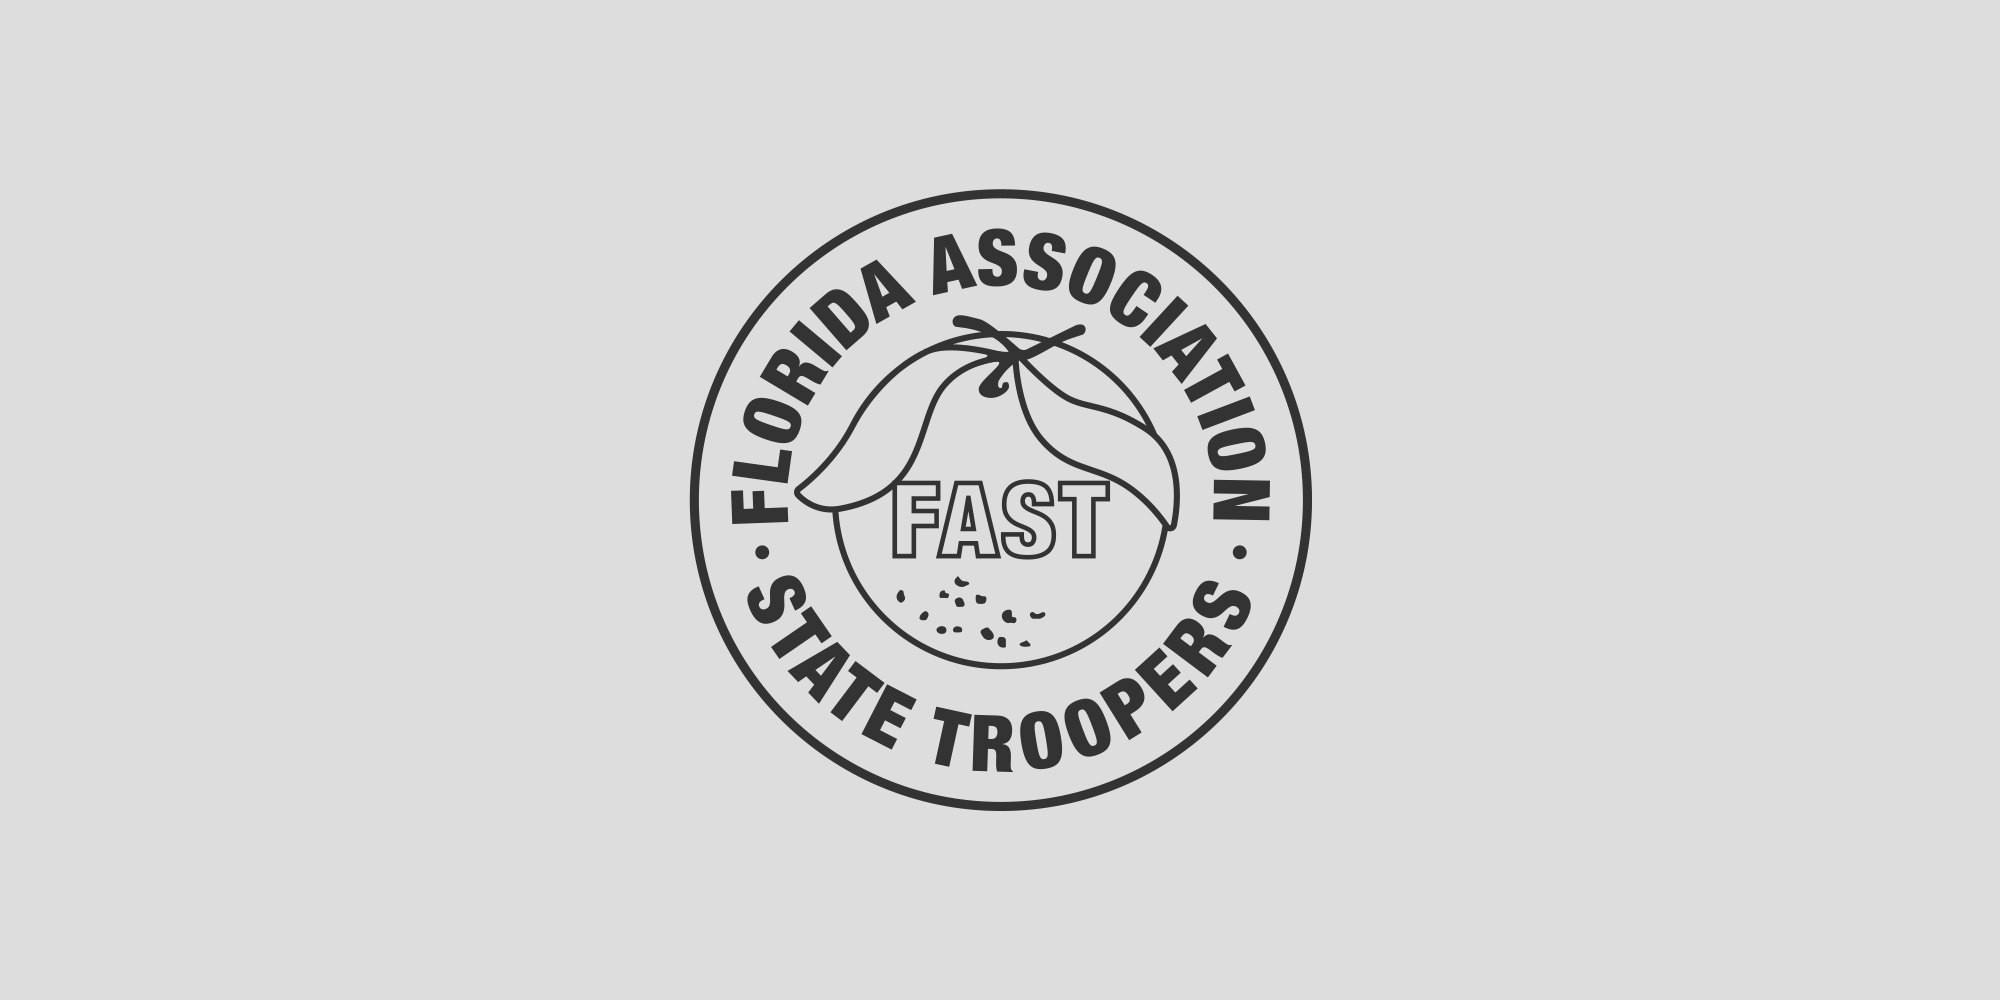 Florida Association of State Troopers